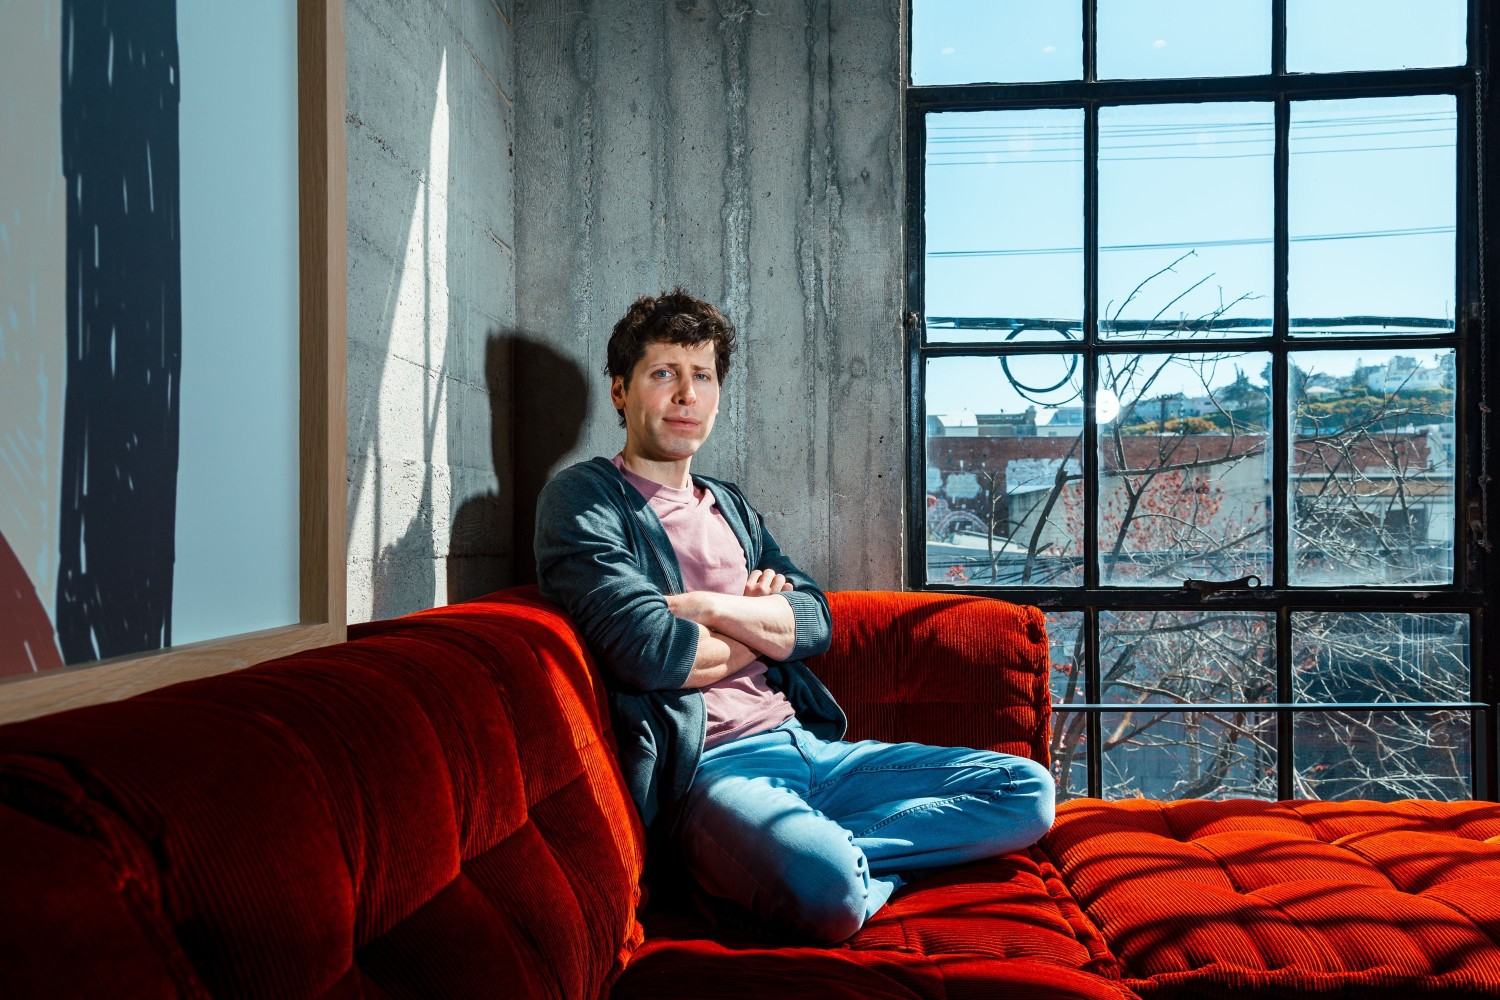 Sam Altman imagines a future where people ‘feel a little bit less ourselves’ without AI.